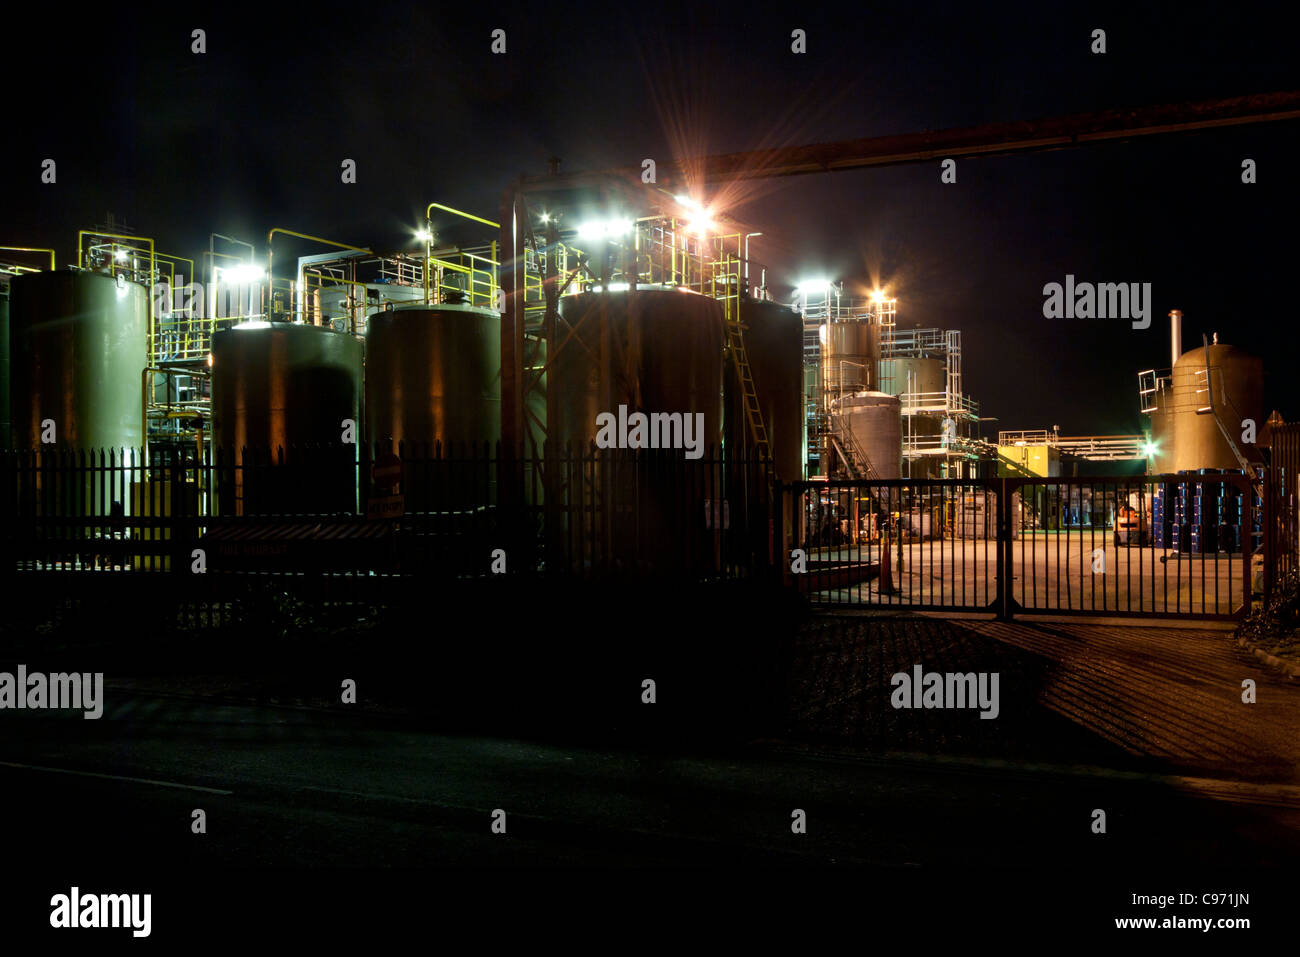 Industrial Building Buildings Plant Lit Illuminated At Night after dark Stock Photo